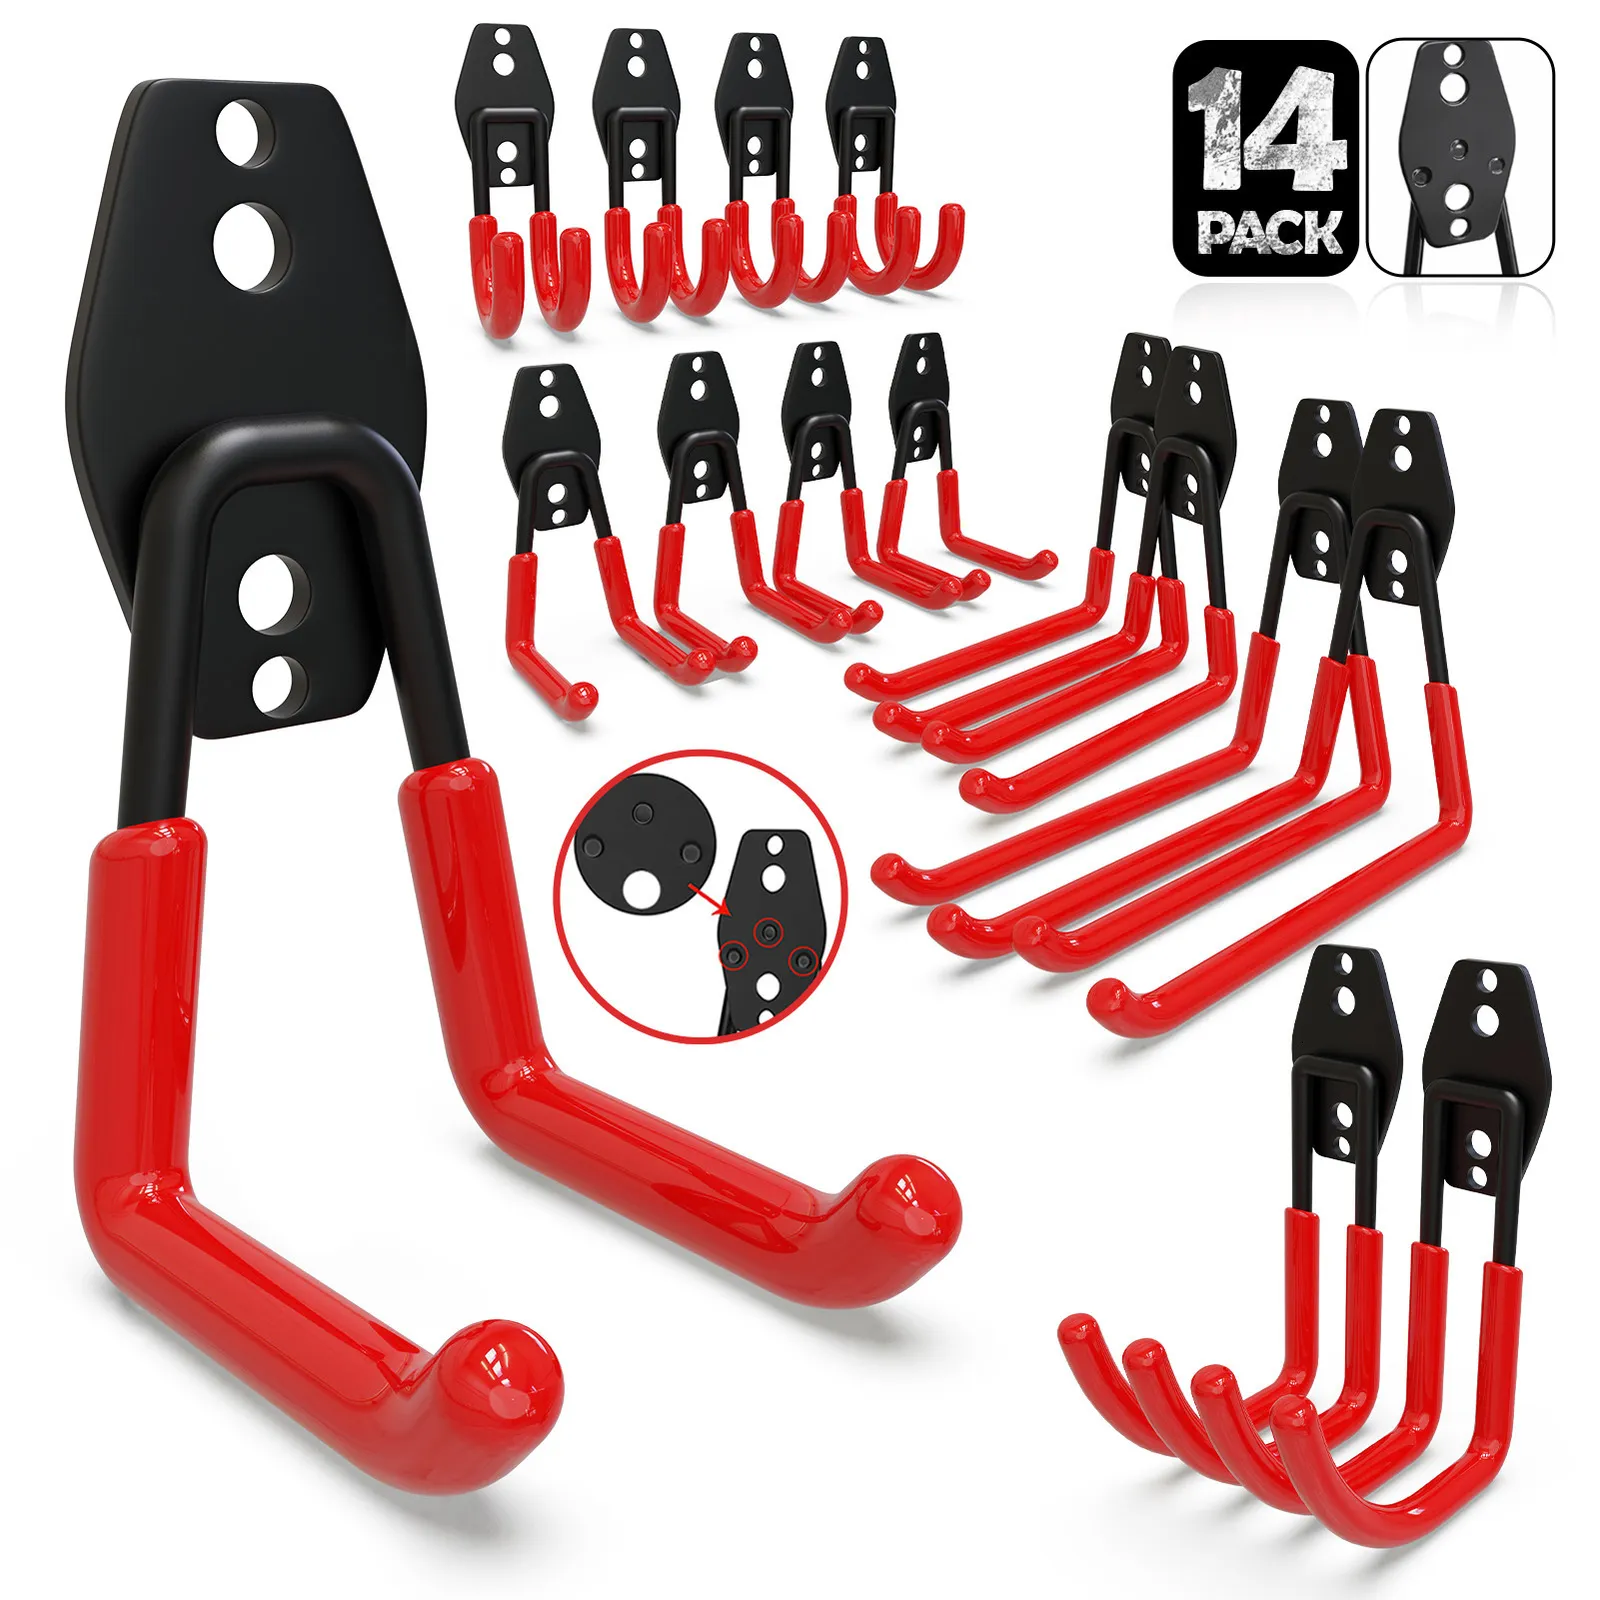 Heavy Duty Wall Mounted Garage Track Hooks For Garage, Ladder, Shed, Chair,  Yard 3H Hanging Shovel And Garden Tools 230807 From Youngstore10, $50.82